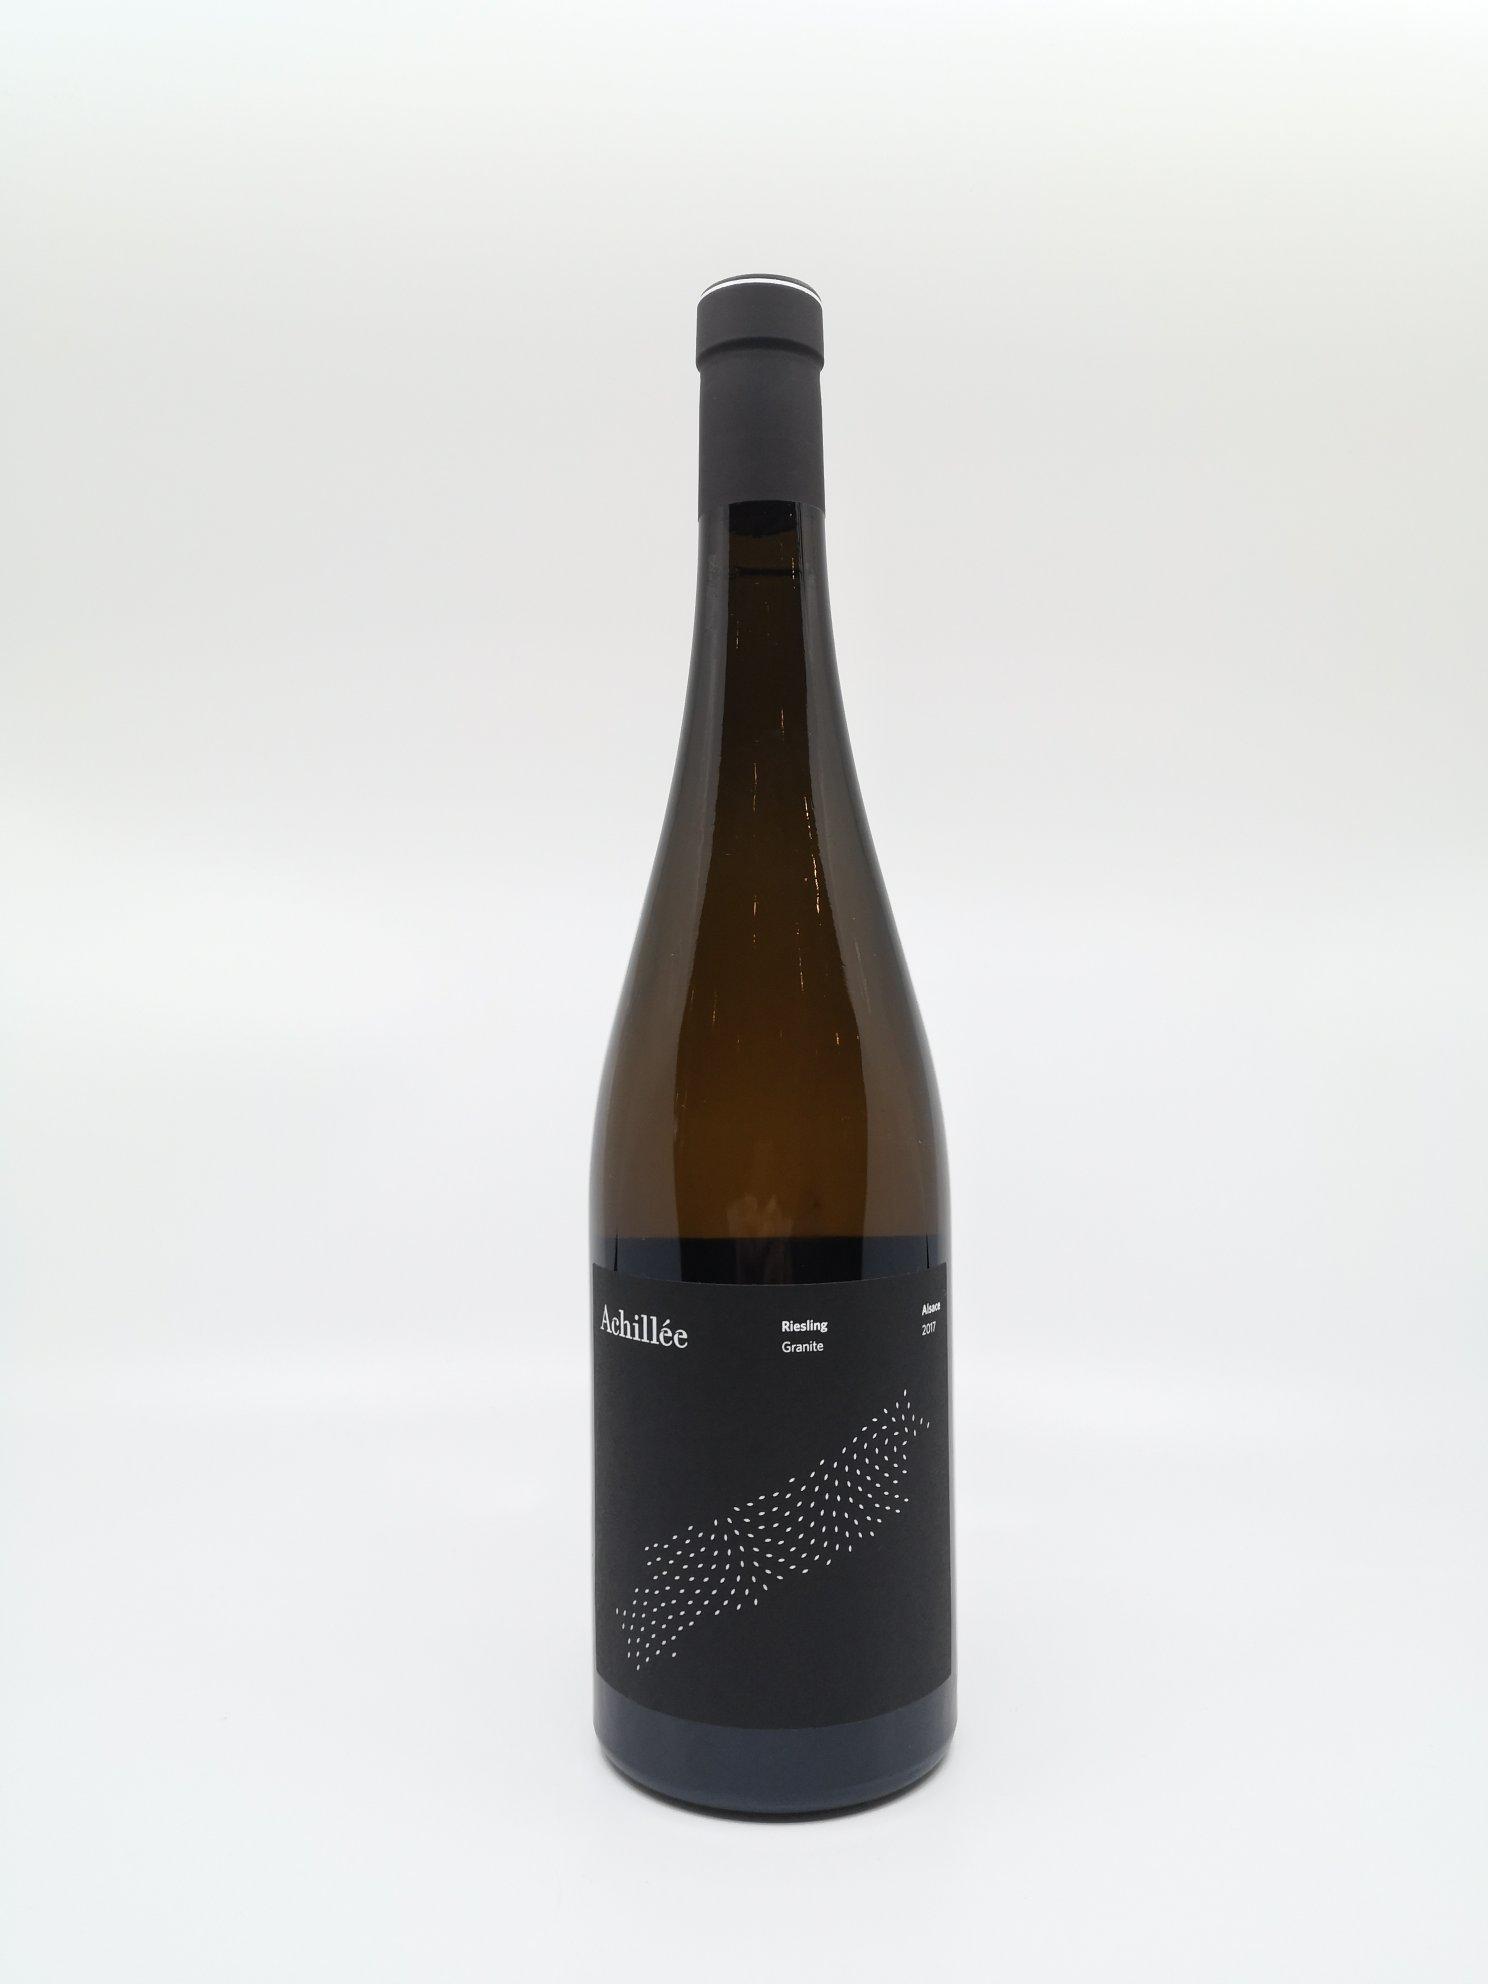 ALSACE Riesling Granit ACHILLEE 2017